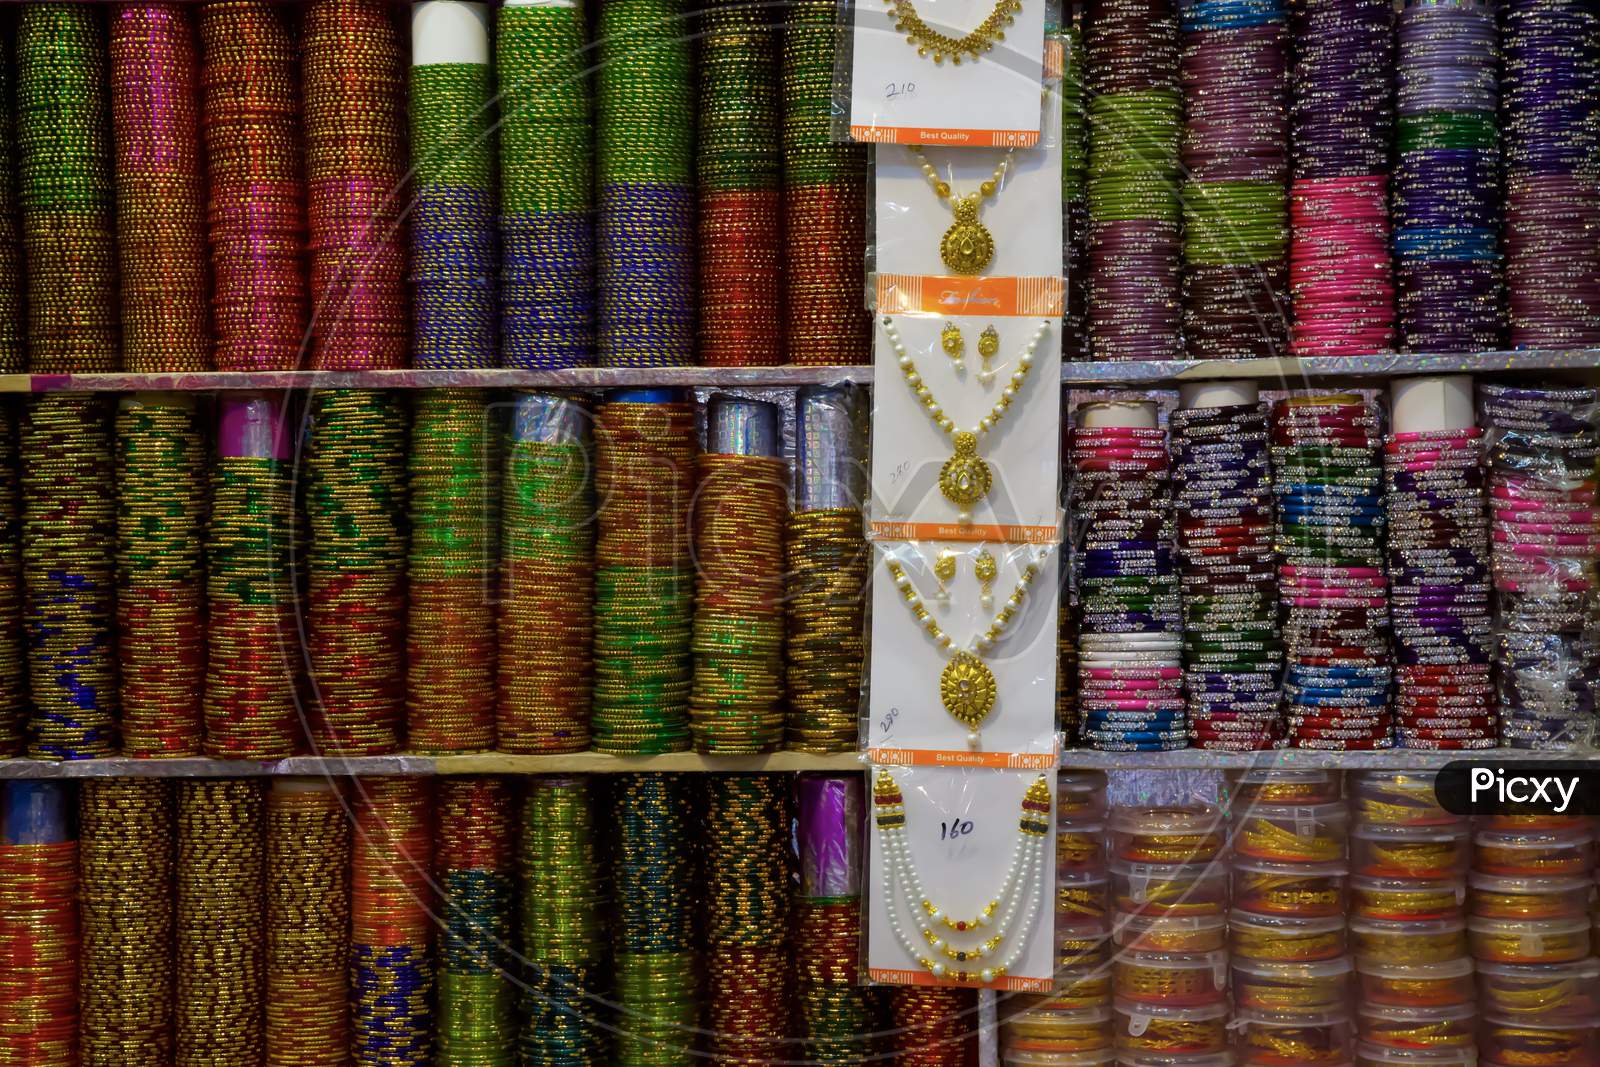 Bangles And Jewellery For Sale At Panjim Market, Colourful Bangles And Necklaces For Sale At Panjim Market, Goa India .